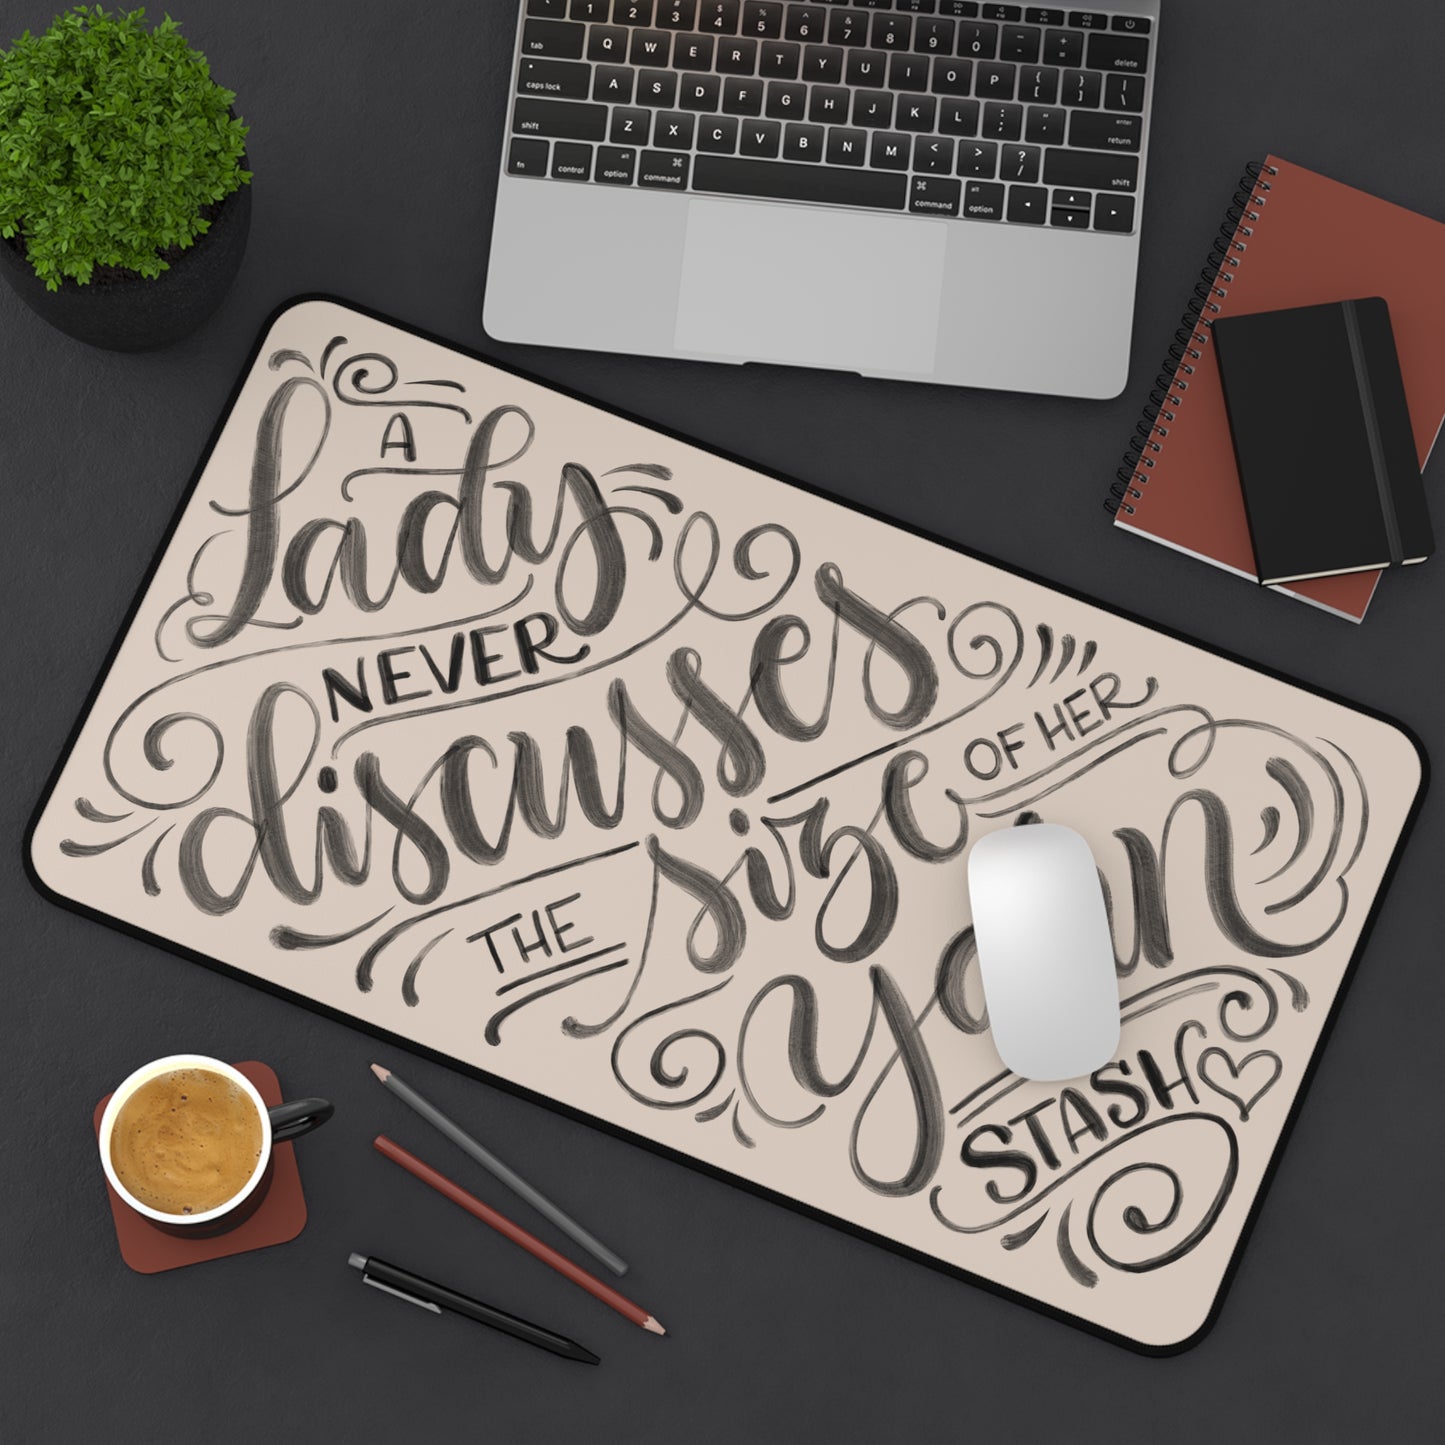 A lady never discusses the size of her yarn stash - Tan Desk Mat - howjoyfulshop